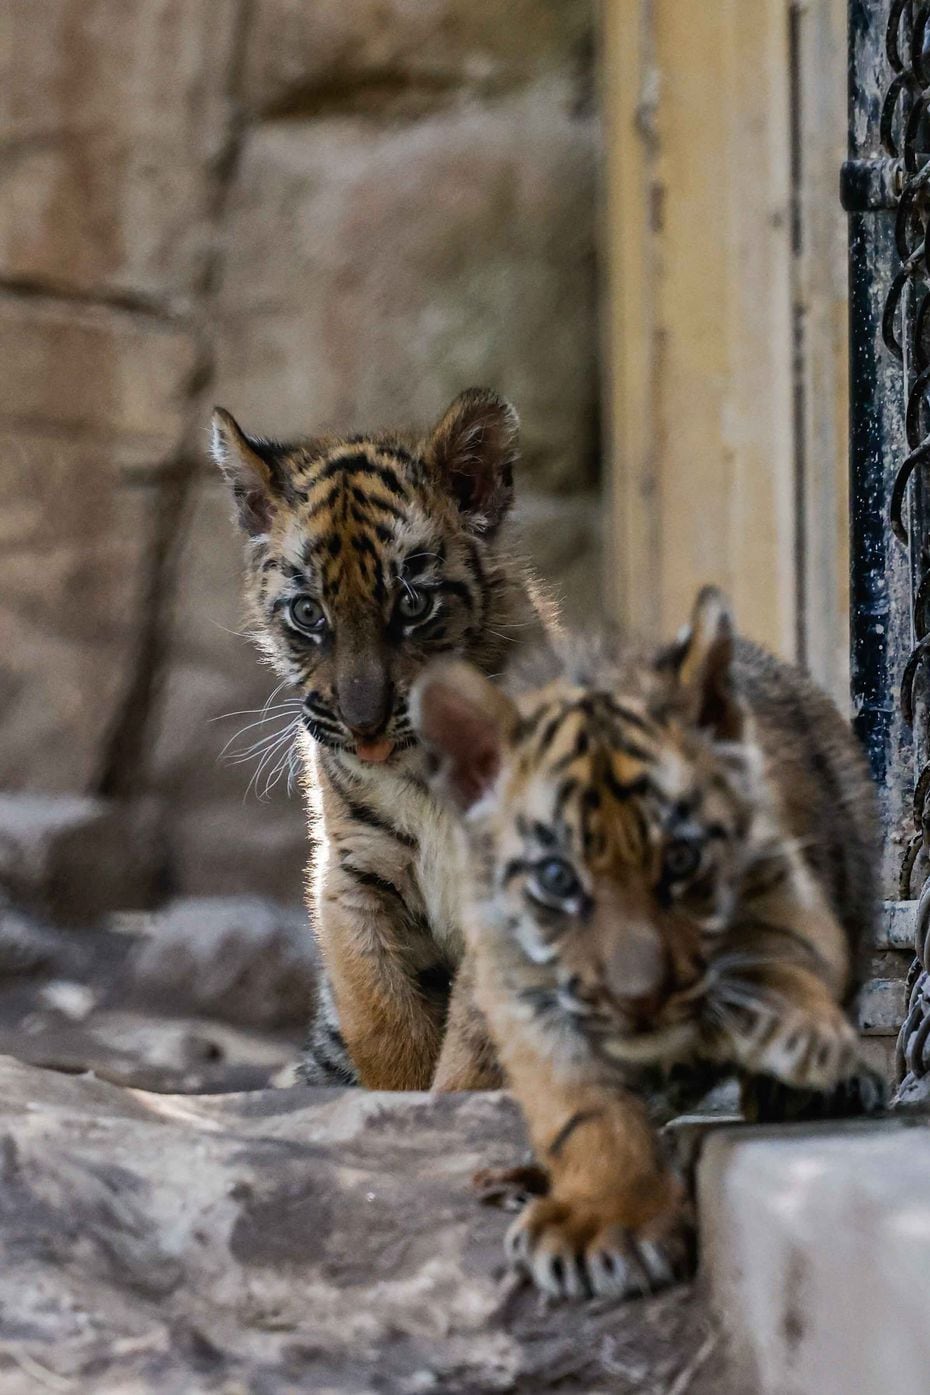 Nine-week-old tiger cubs Rudi and Nety make their way down the incline inside their habitat...